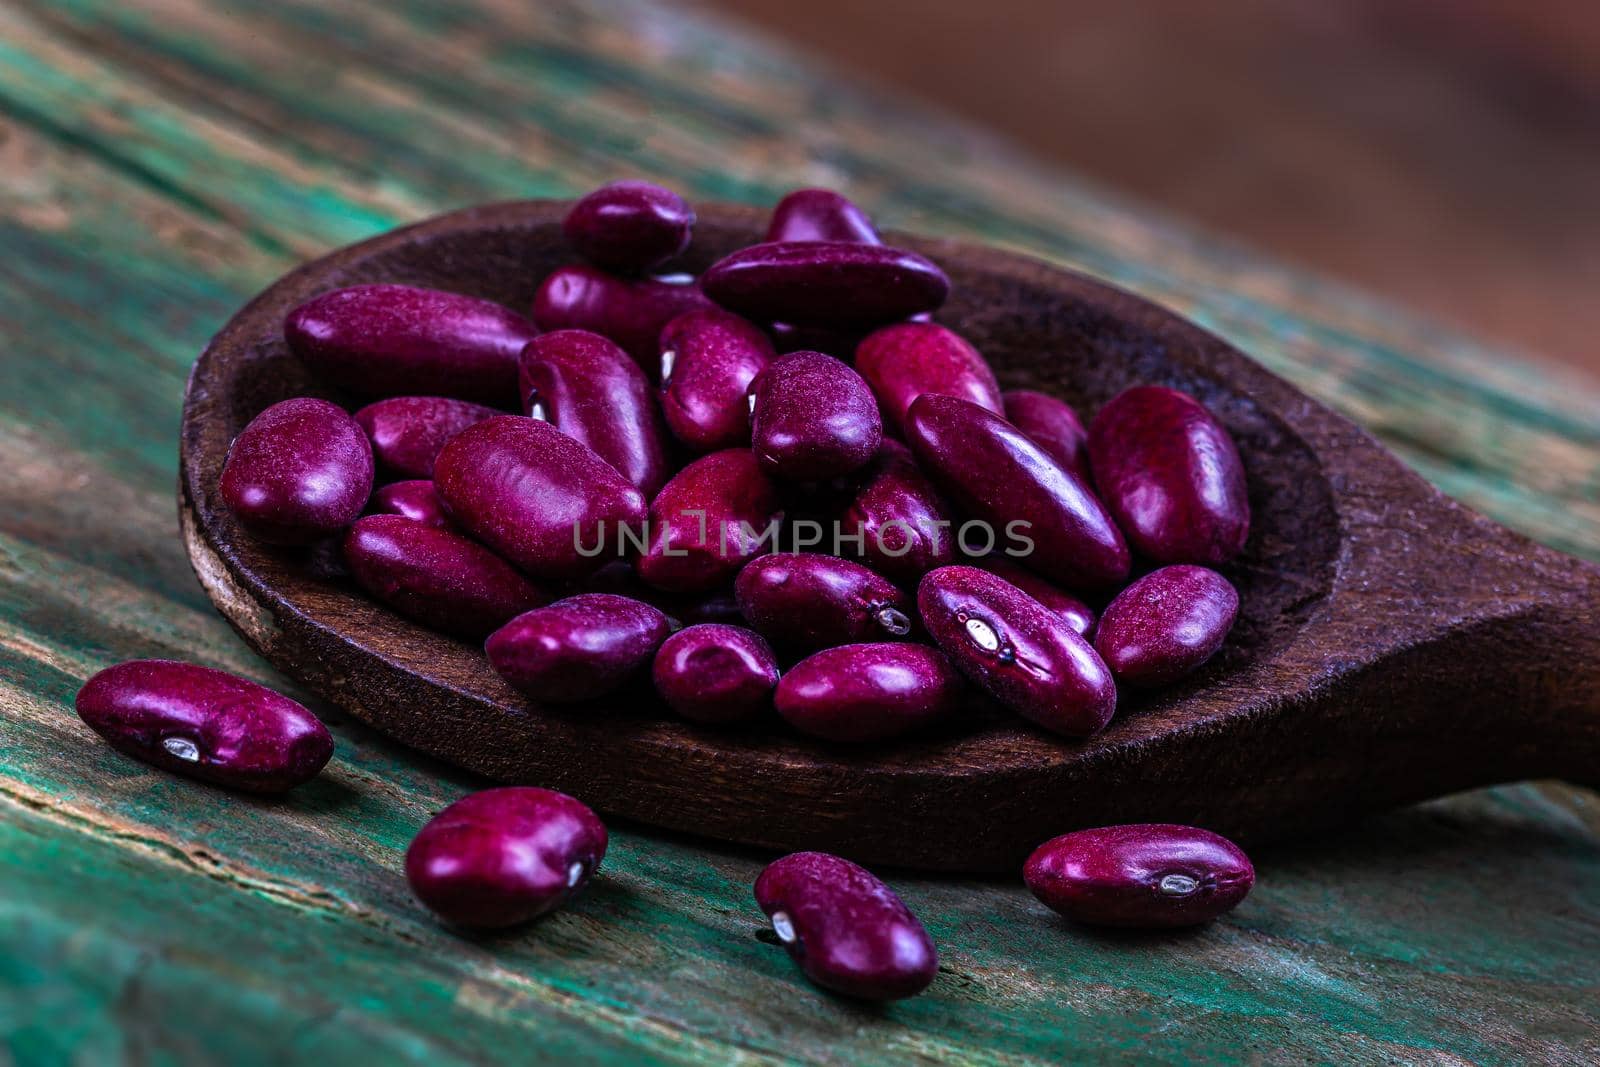 Red beans in close-up in a wooden spoon